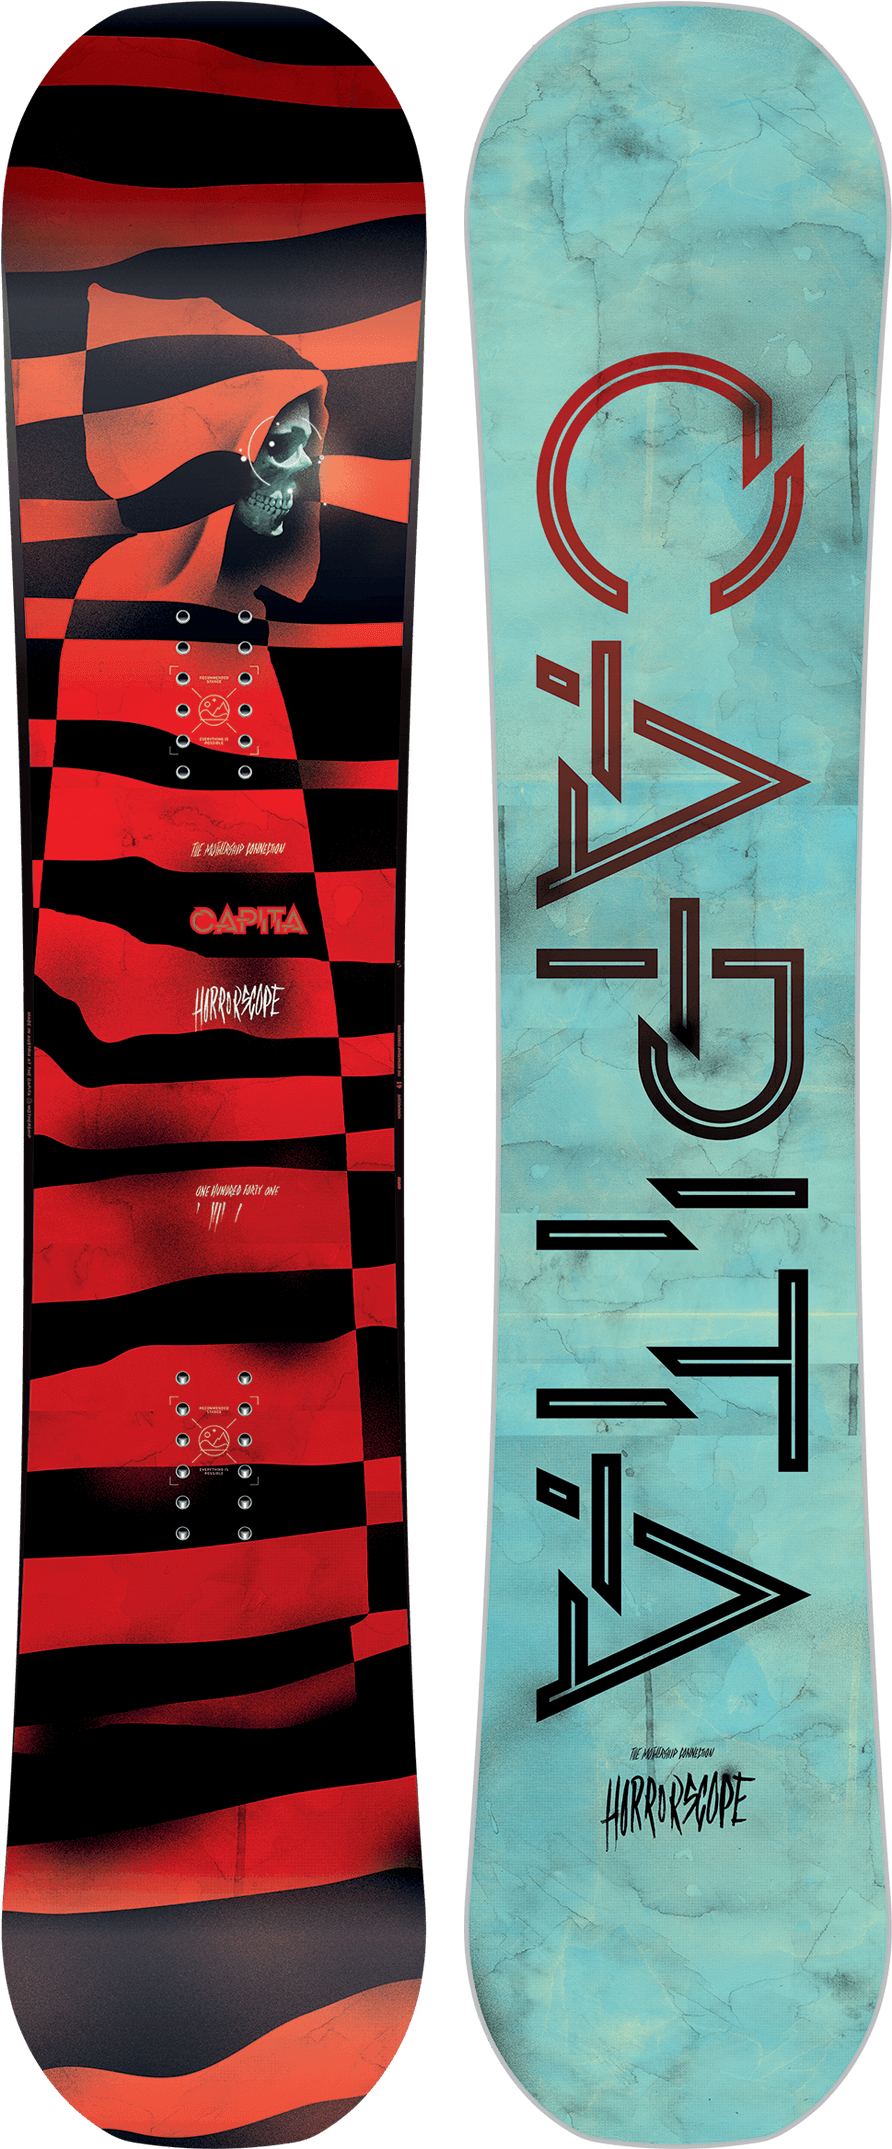 A Snowboard With A Red And Black Design